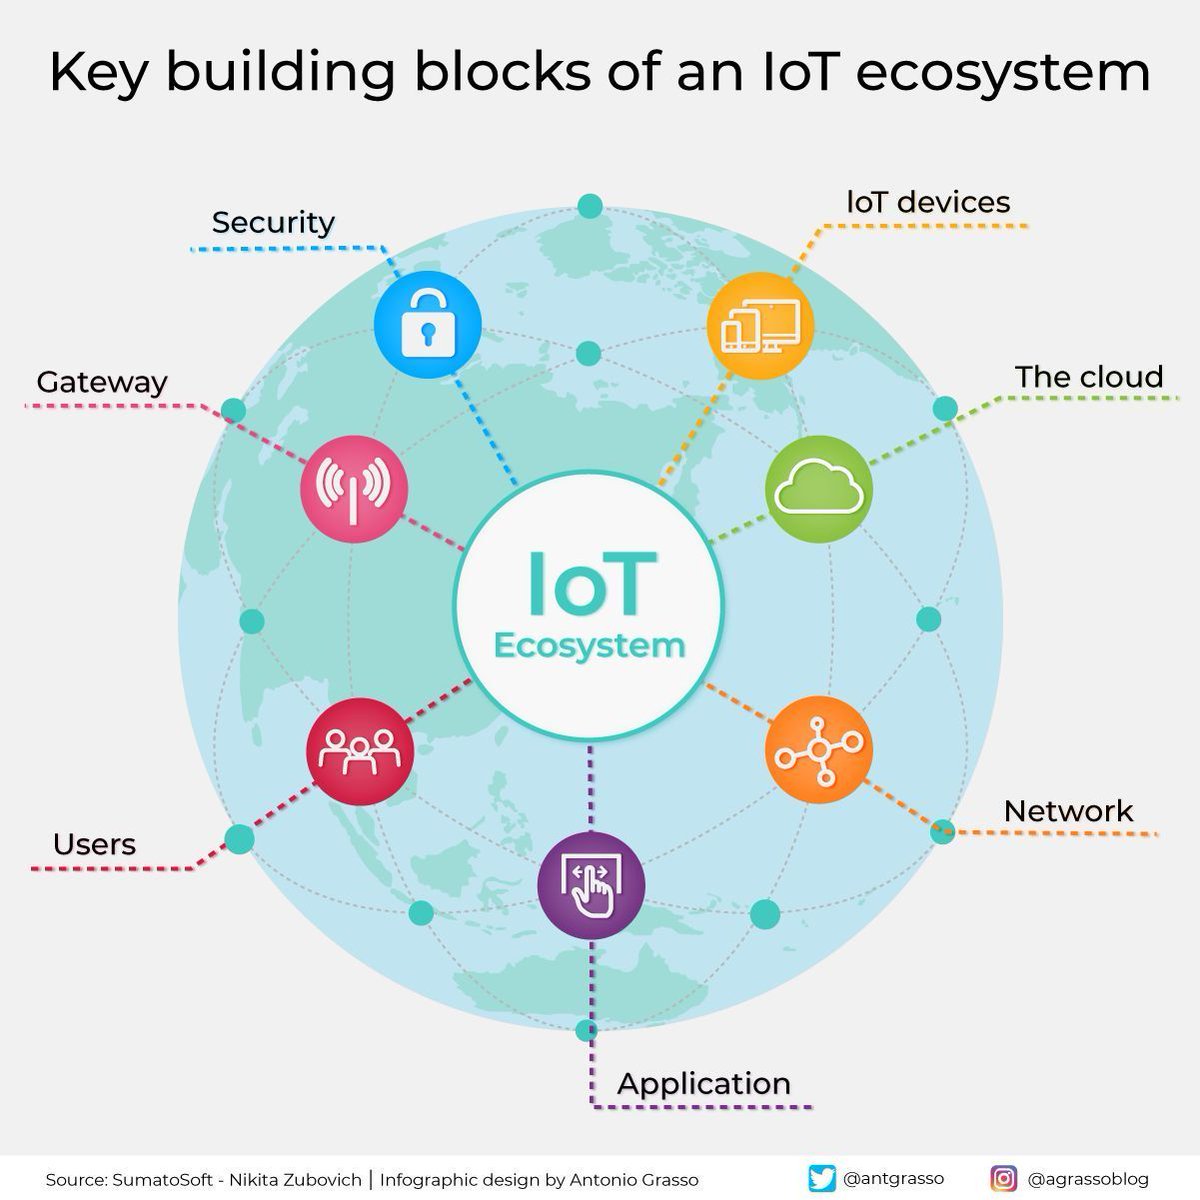 Internet of Things (IoT) ecosystems blend devices, gateways, and user interfaces with robust security to facilitate seamless data flow managed via applications over interconnected networks. RT @antgrasso #IoT #IIoT #CIO